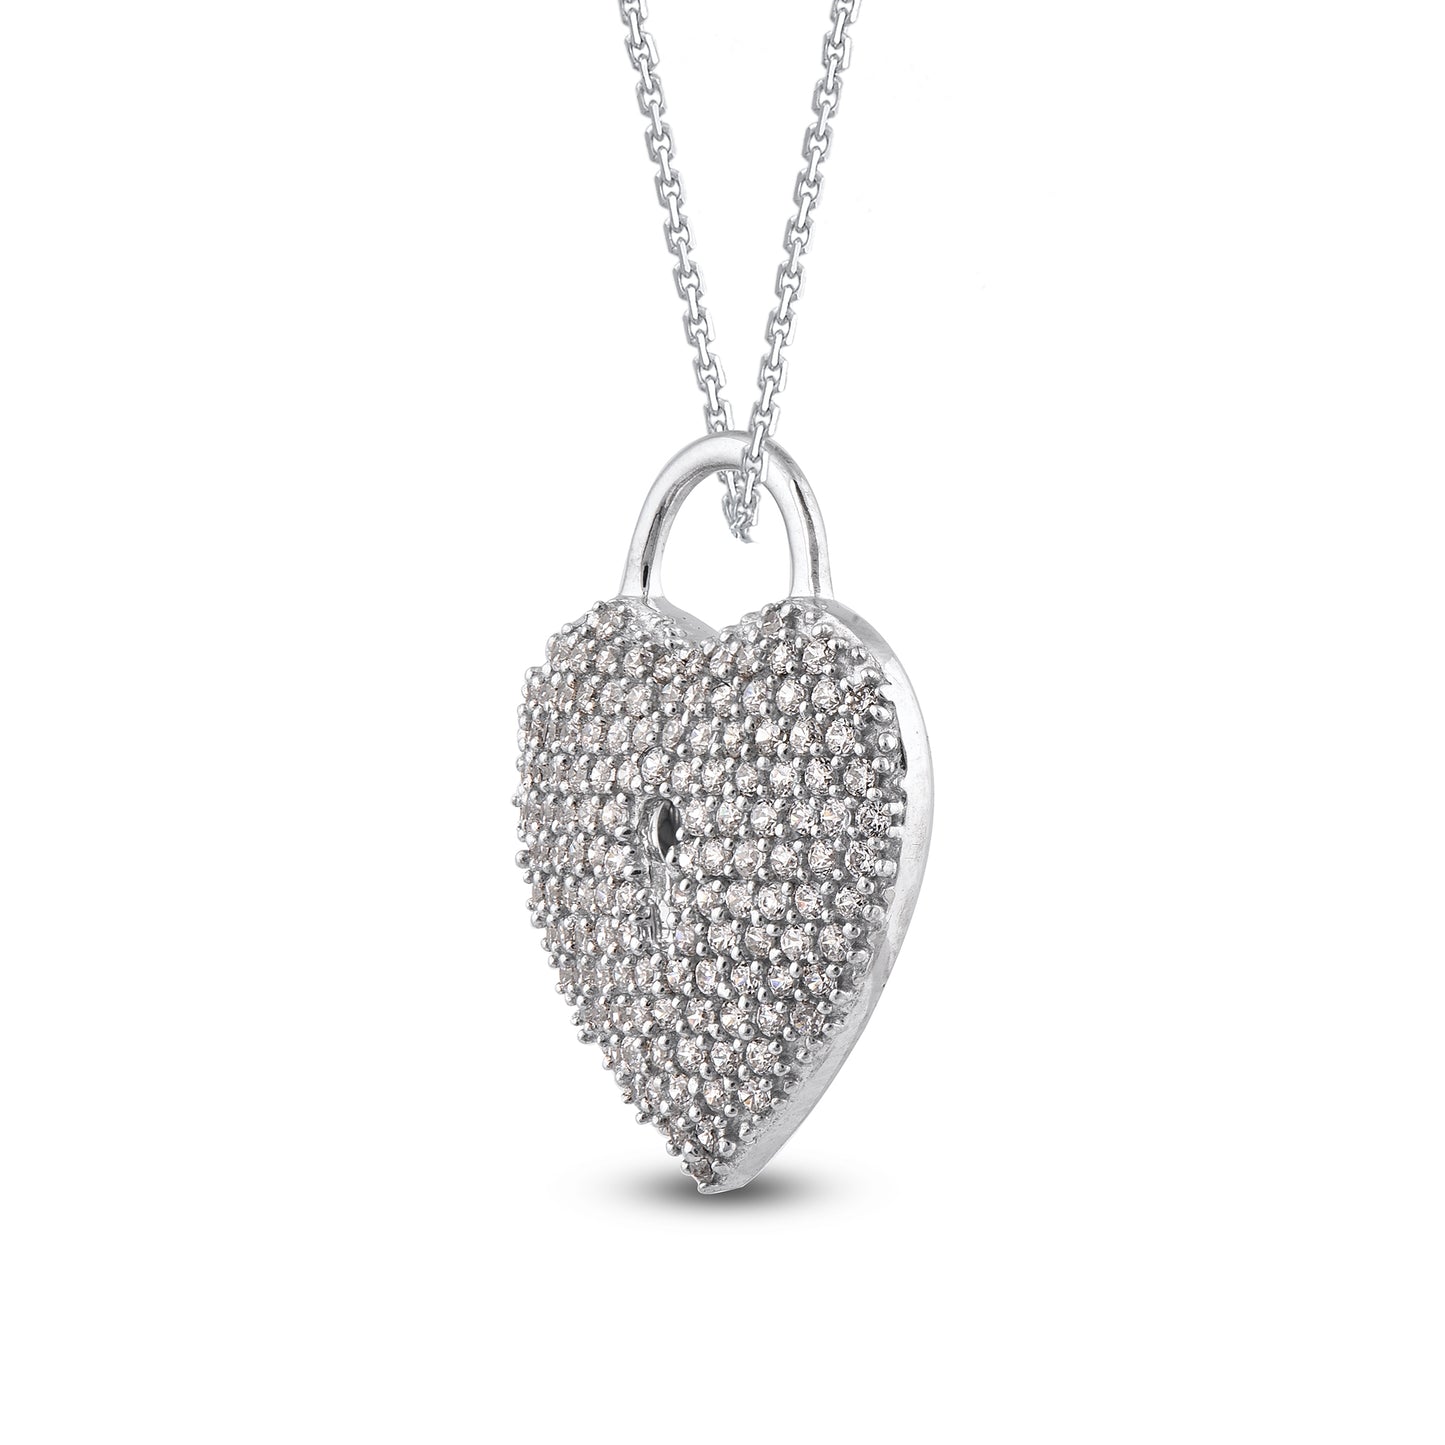 Heart Lock Pendant Necklace 925 Sterling Silver